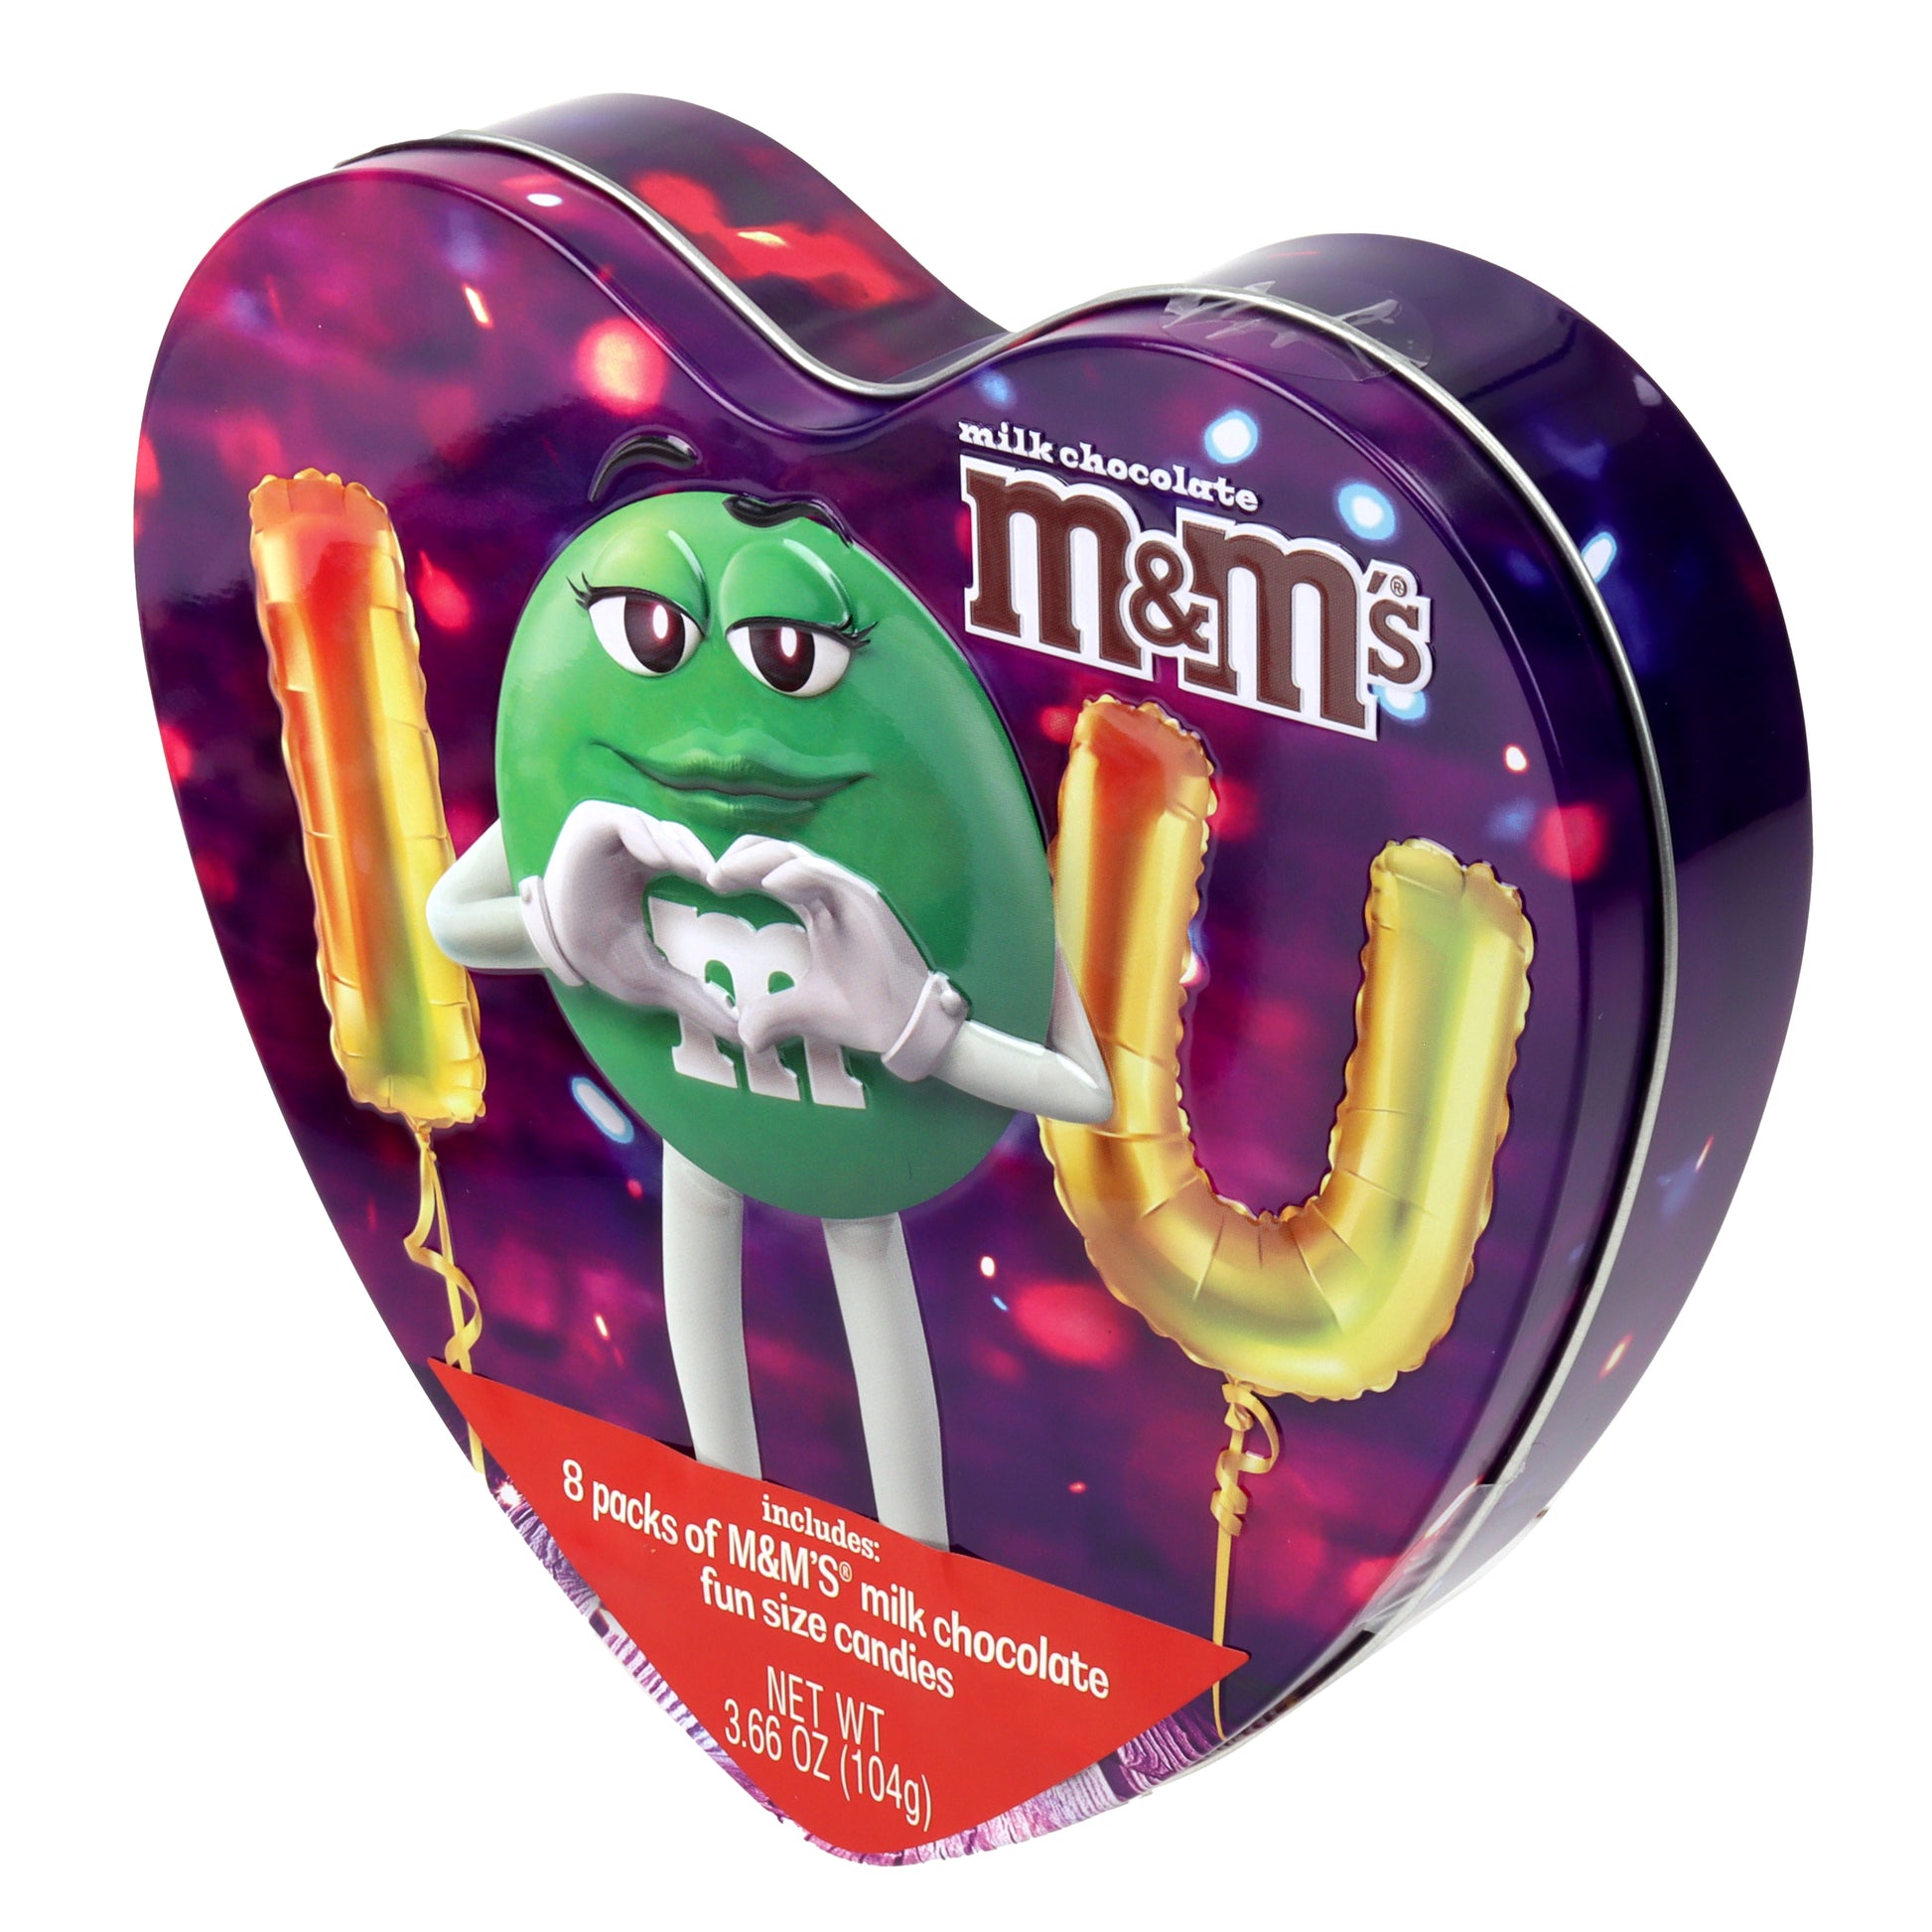 heart shaped tin with a green M&M character on the front with balloons that spell out I <3 U